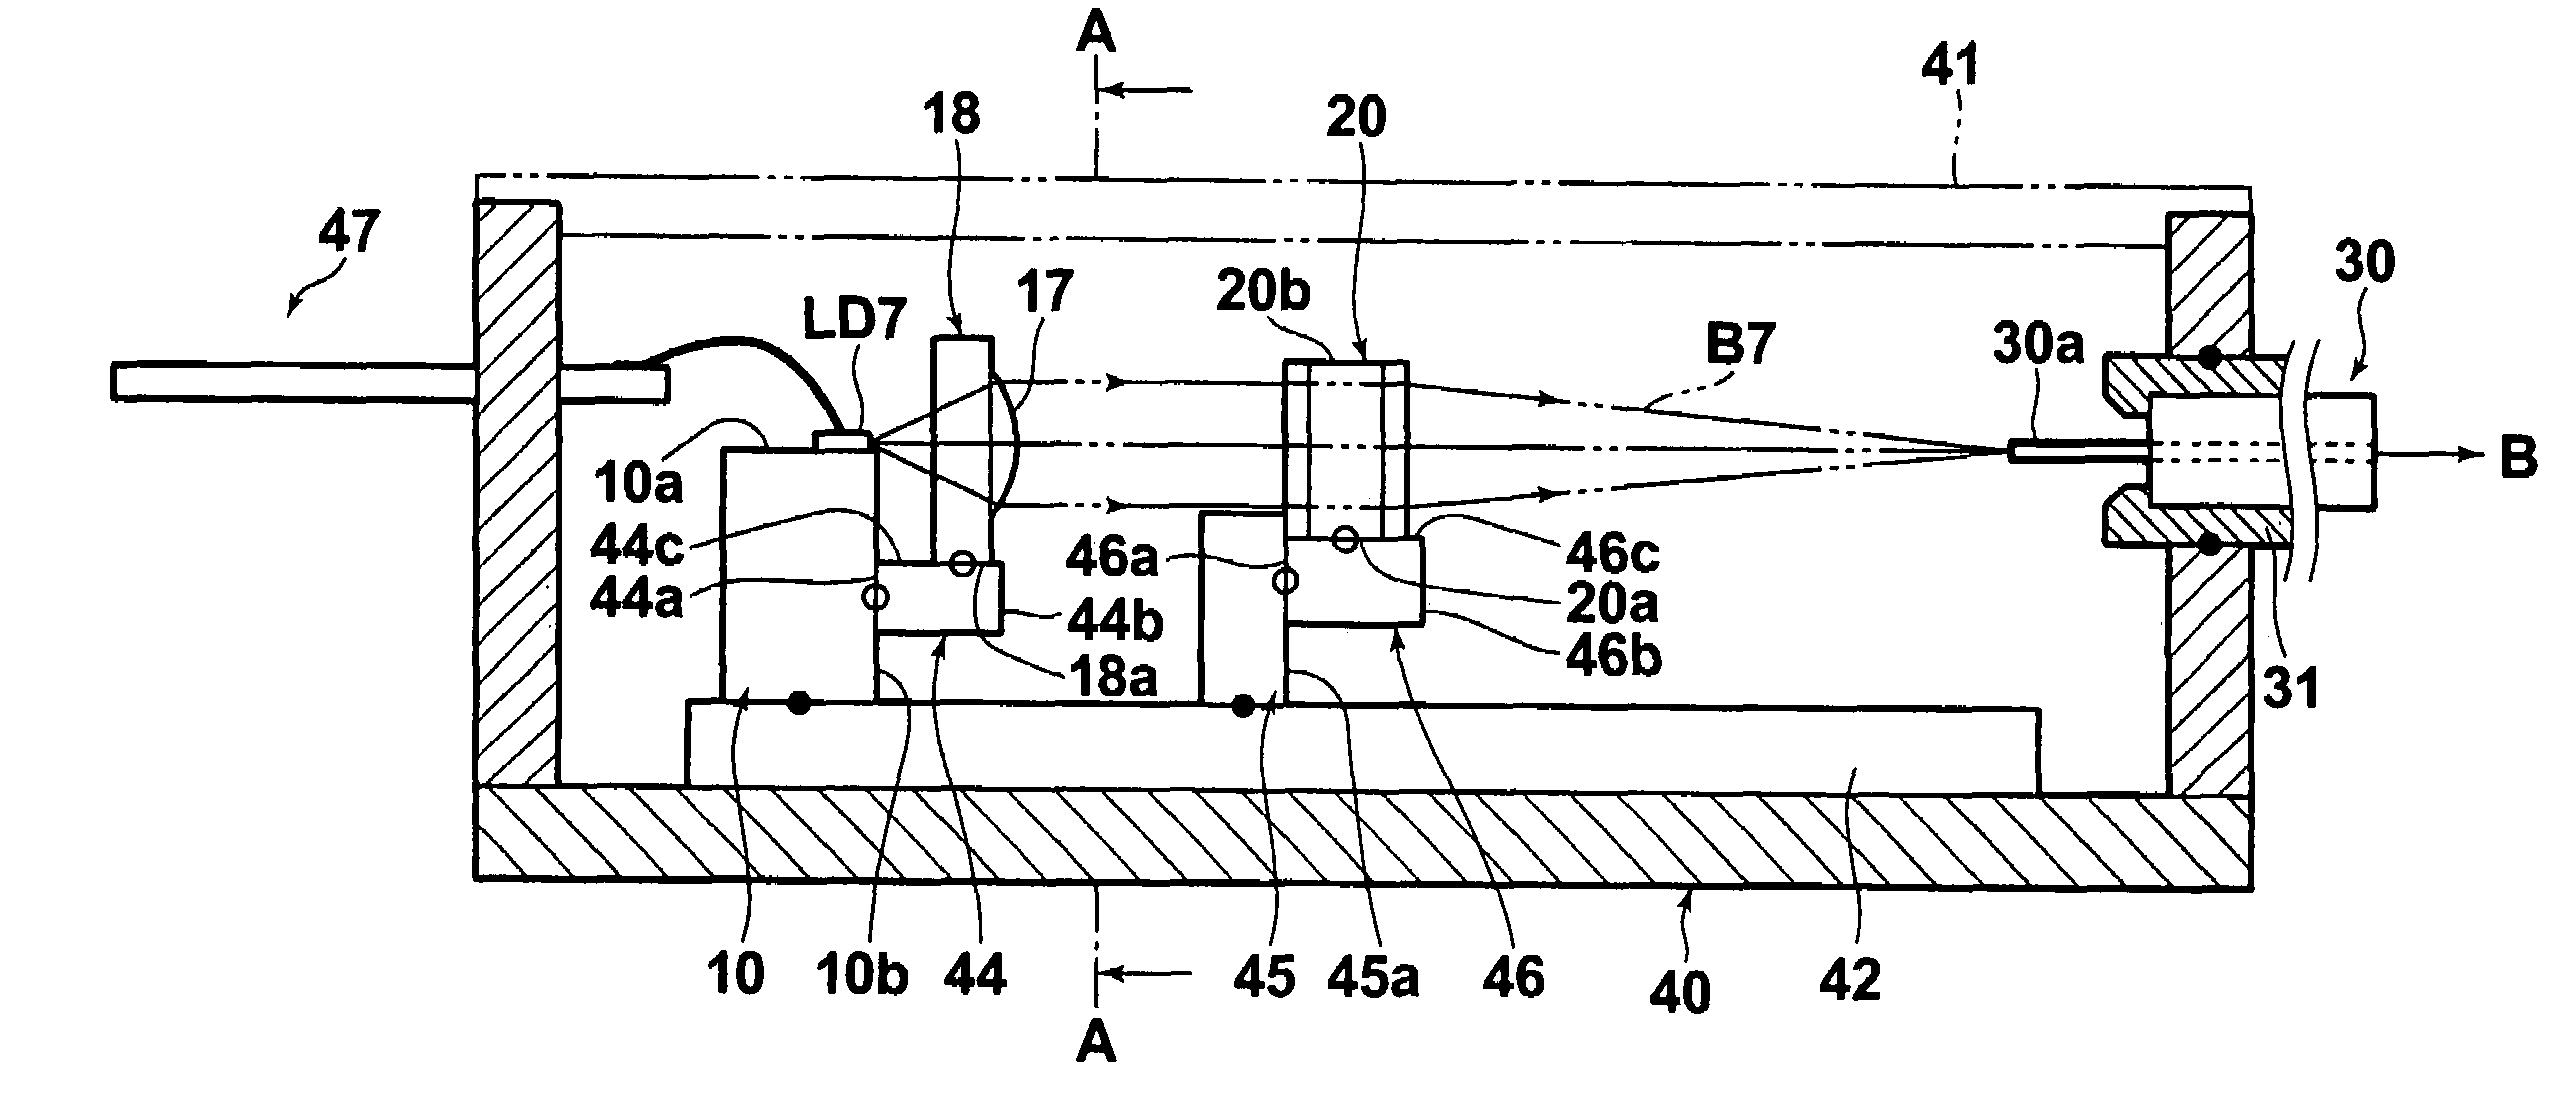 Laser apparatus and method for assembling the same